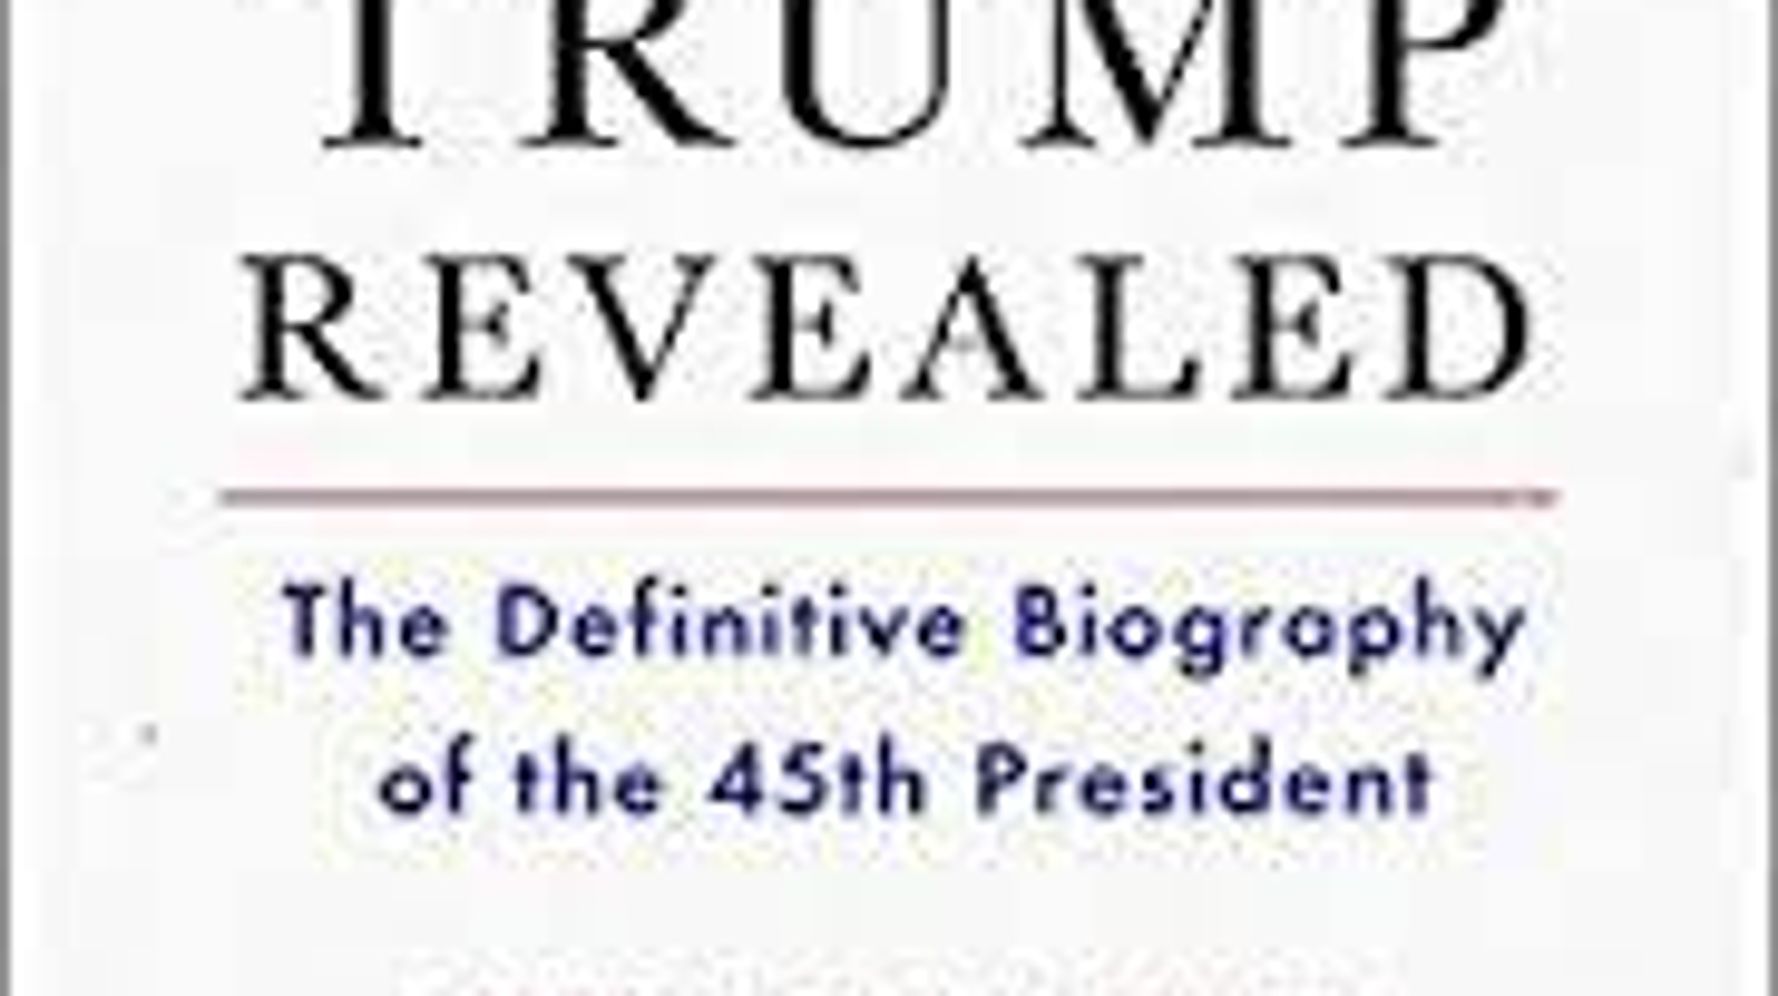 Trump-Revealed-The-Definitive-Biography-of-the-45th-President